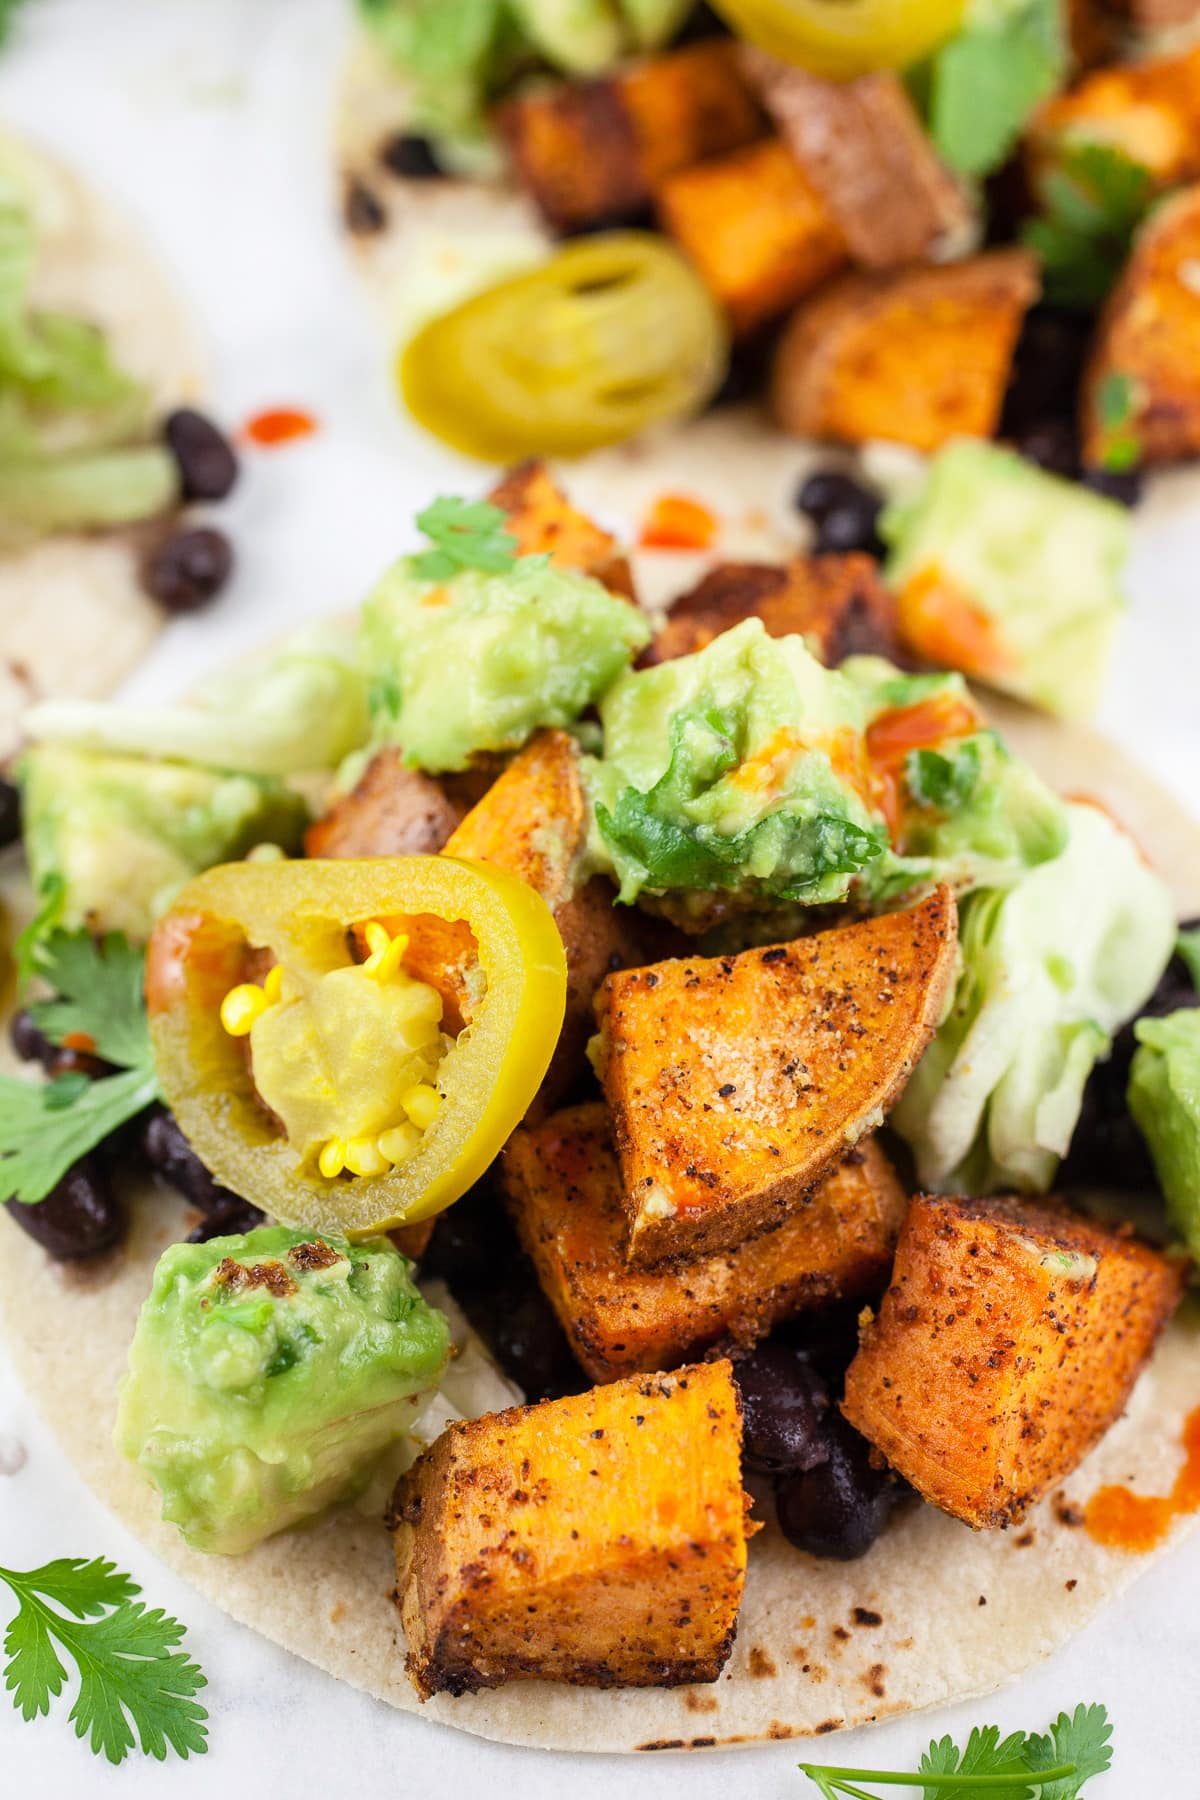 Roasted sweet potato tacos with black beans and avocado salsa on corn tortillas.